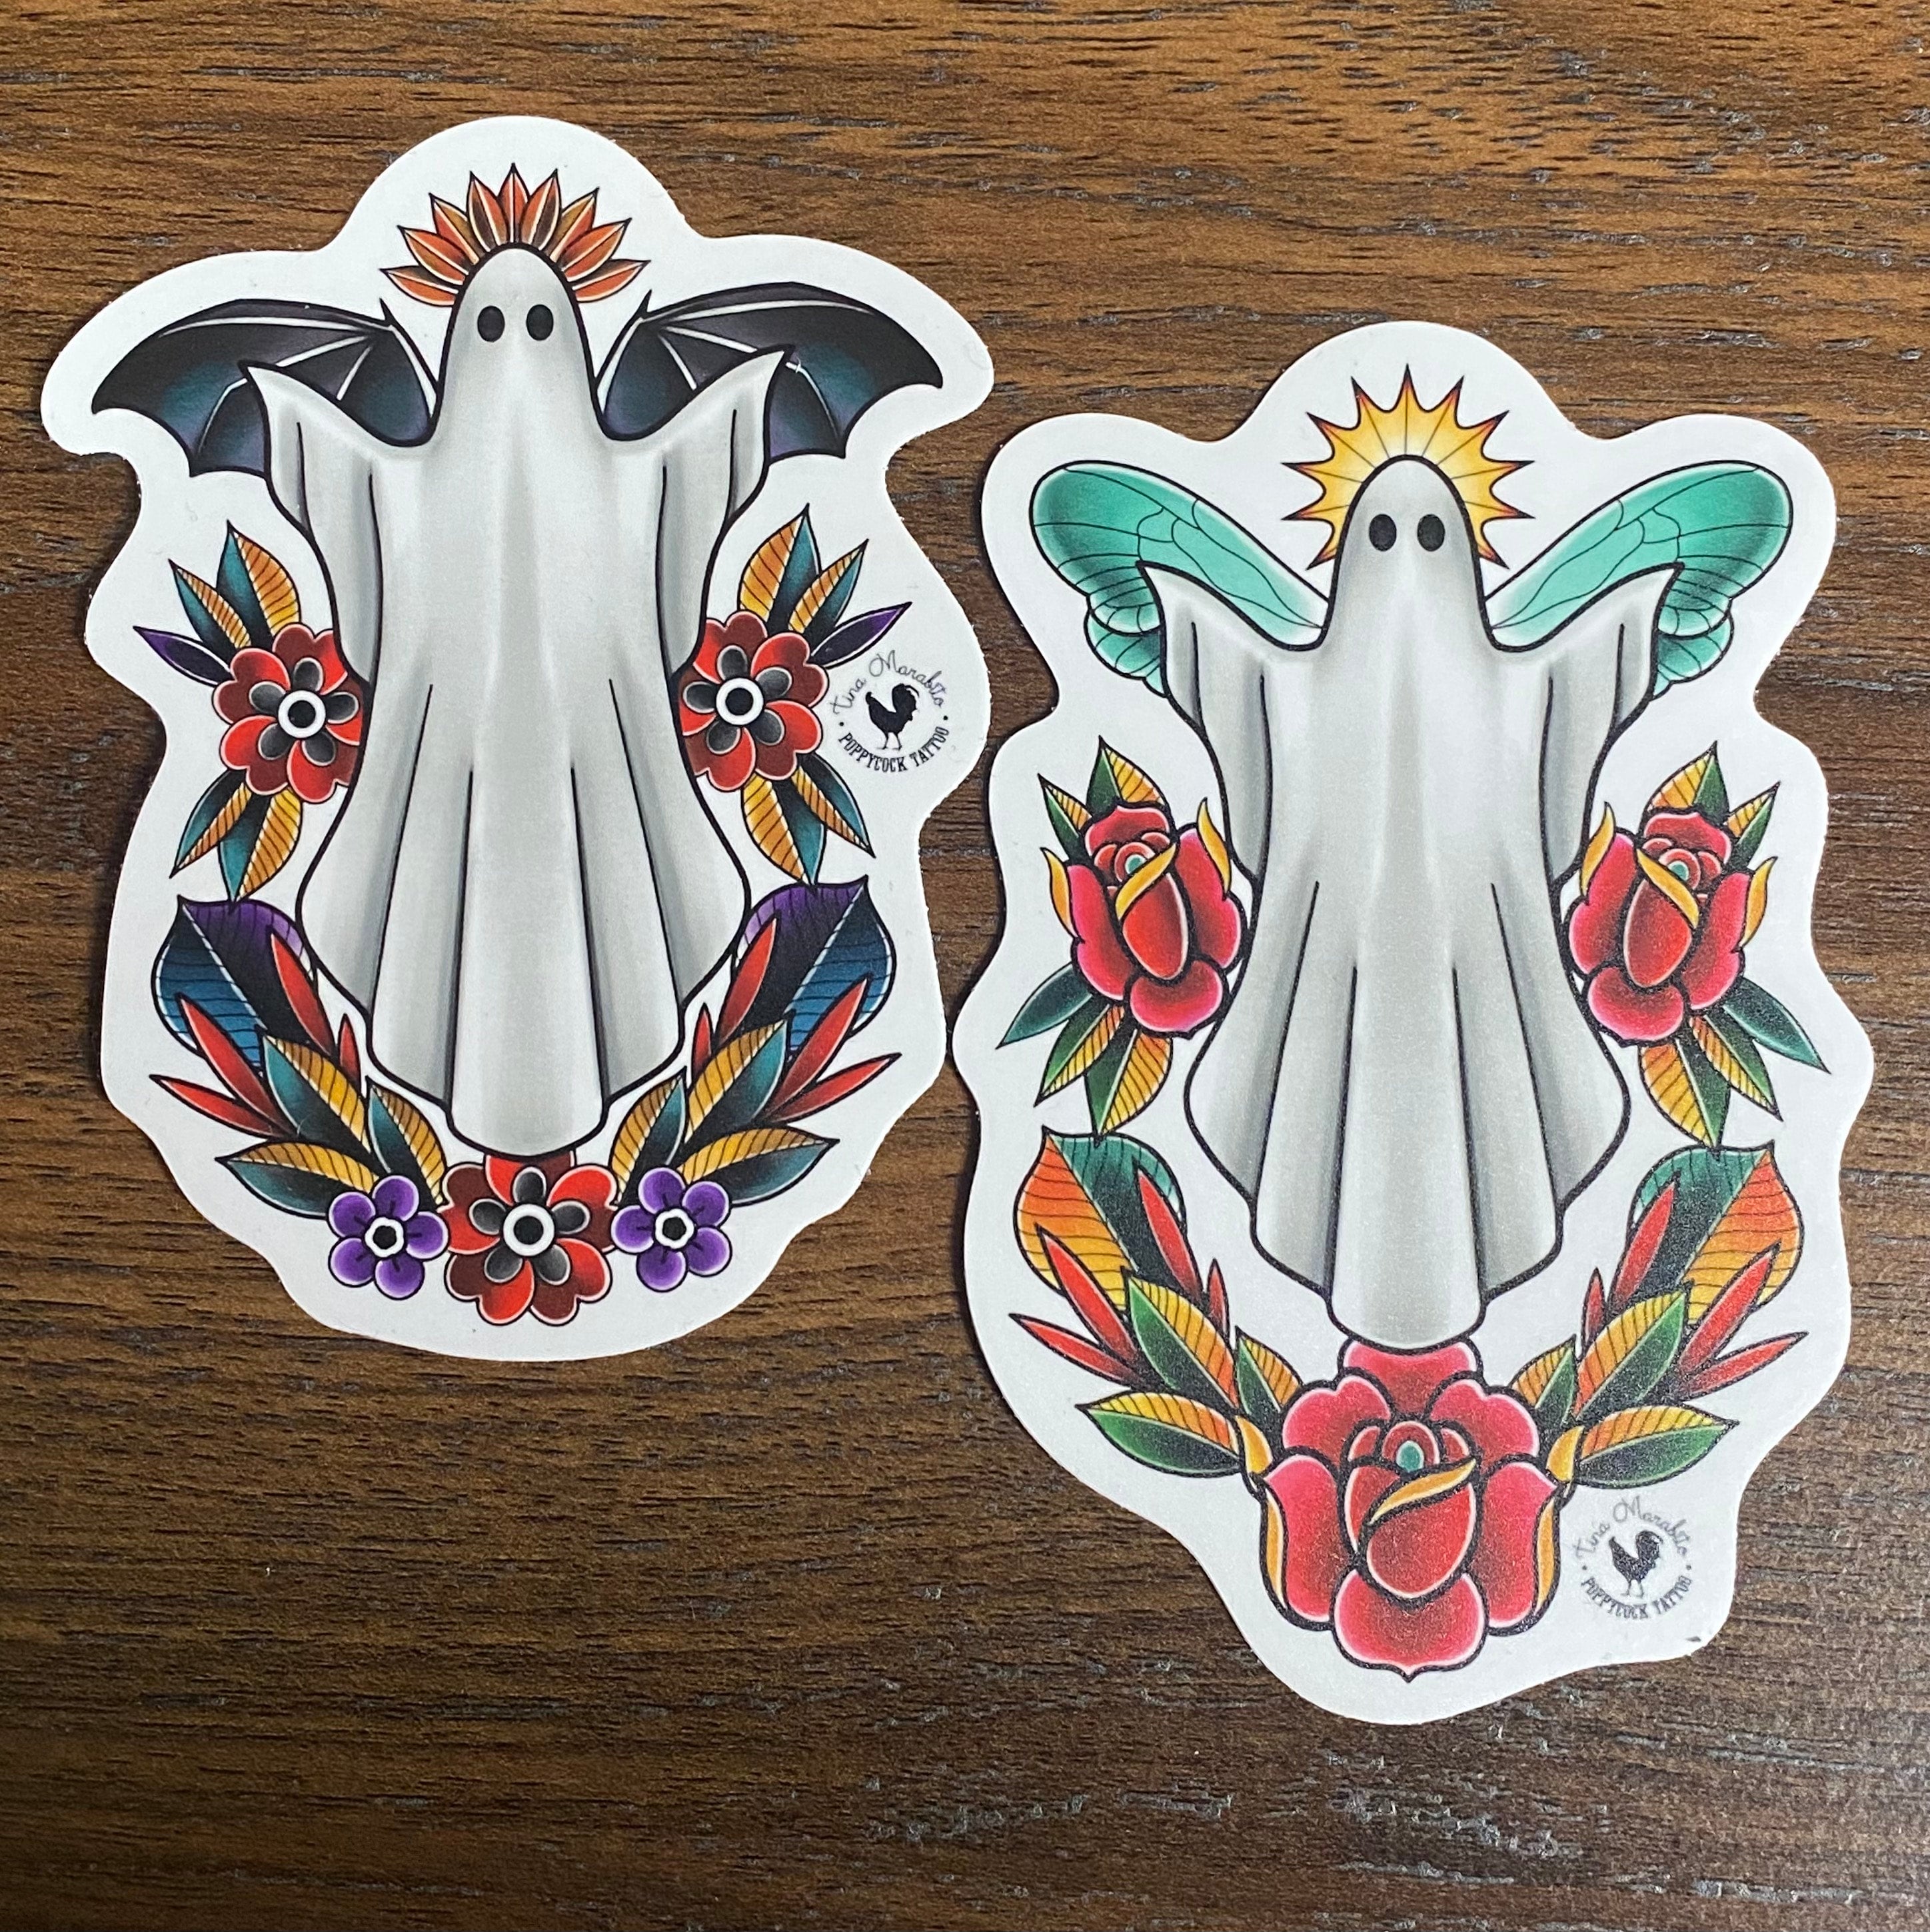 Ghost and Pumpkin Temporary Tattoo